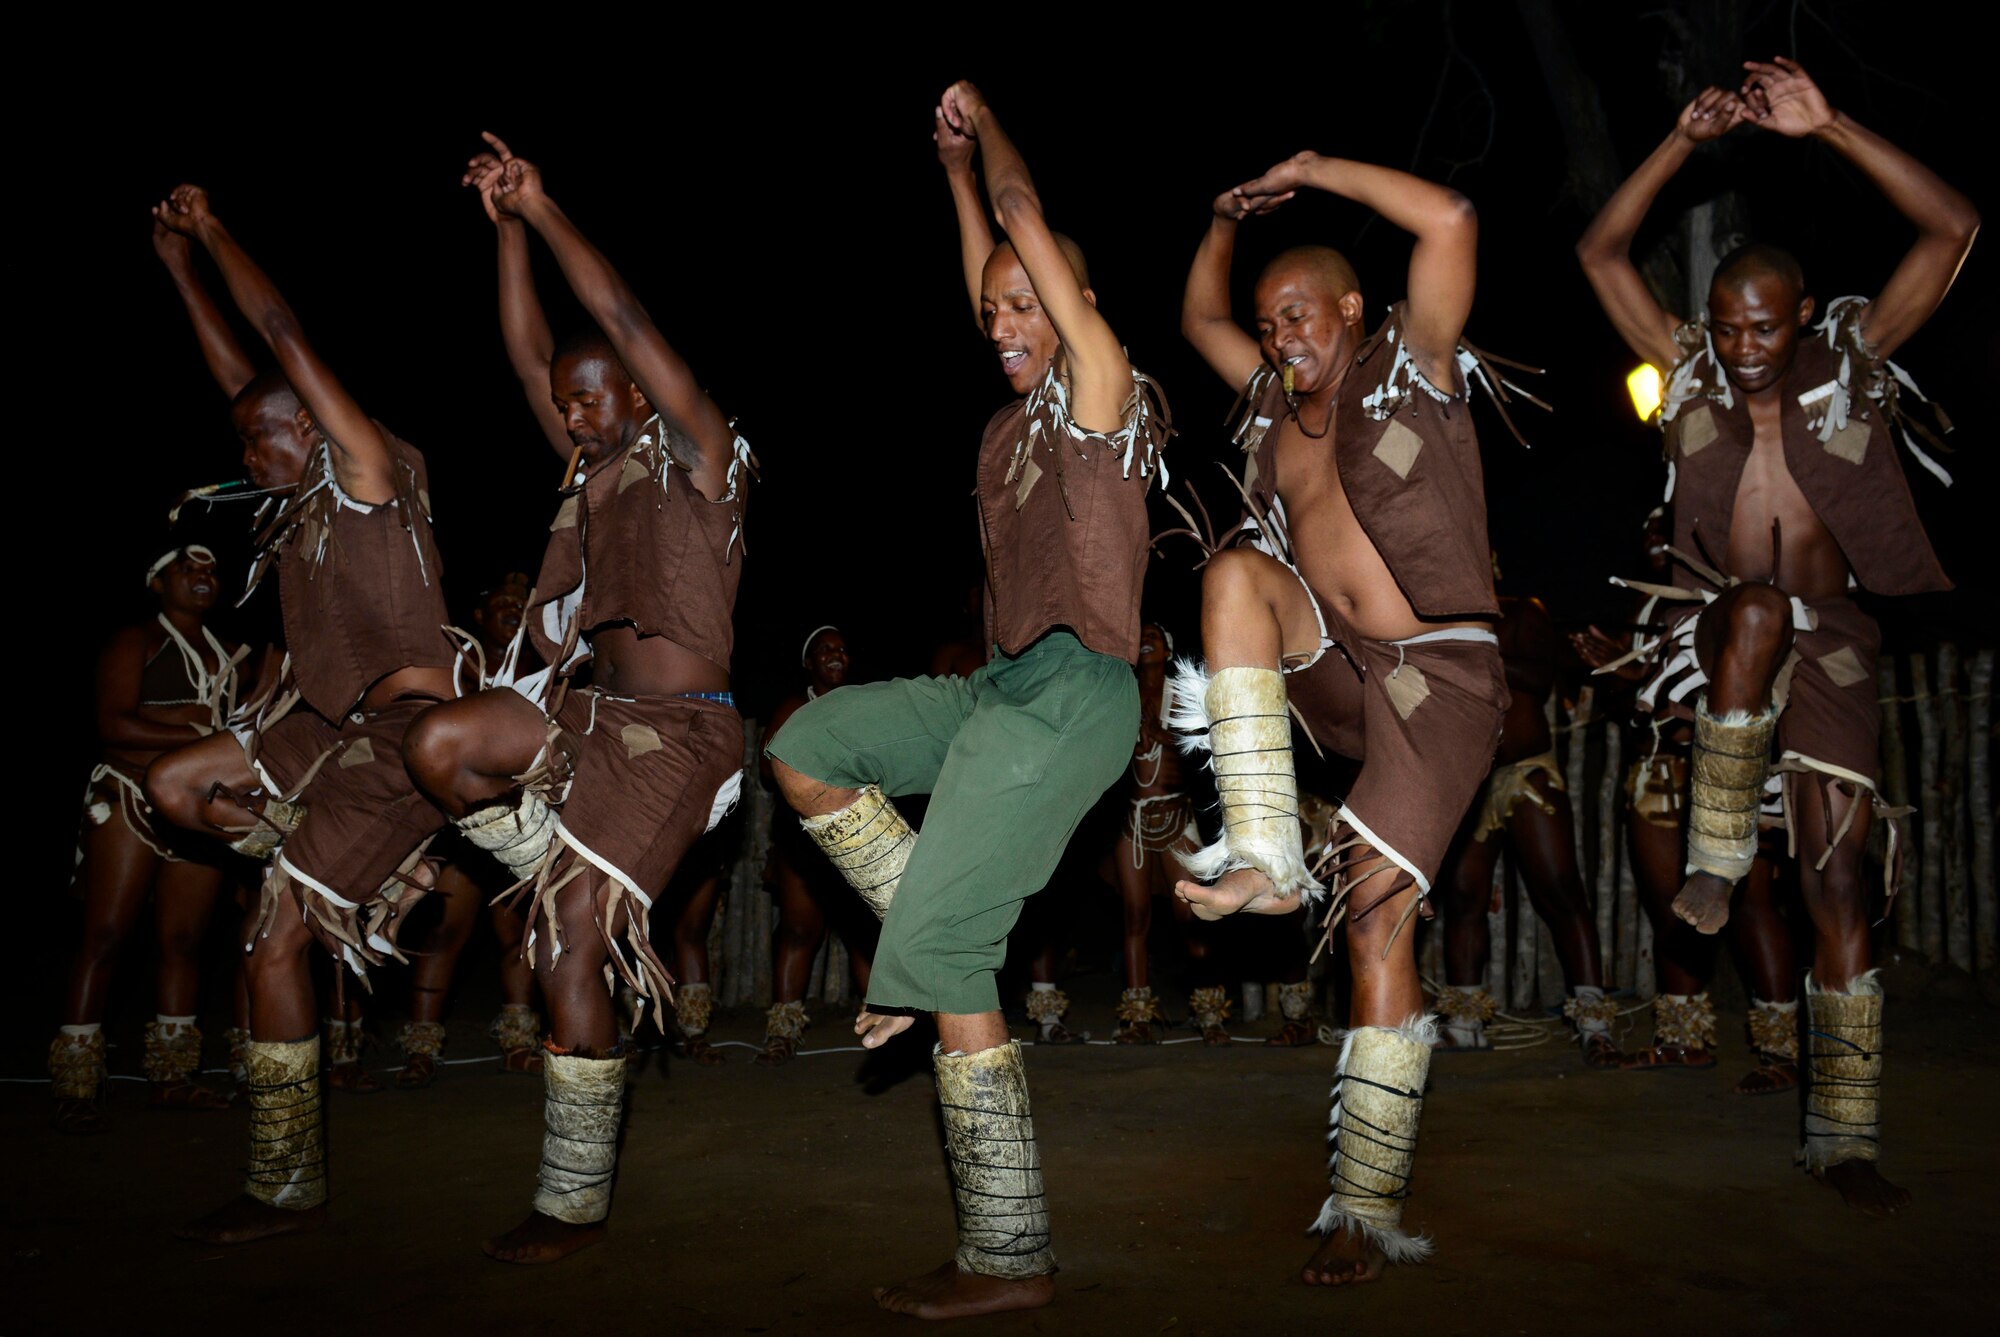 Dancers preform at the closing ceremony of the 2017 African Air Chiefs Symposium in Kasane, Botswana on May 17, 2017. The closing ceremony was held in conjunction with a cultural dinner organized by the symposium’s co-host, Botswana. The U.S. and Botswana have a strong relationship, and the U.S. military has a long and productive history of working with the Botswana Defence Force.(U.S. Air Force photo by Staff Sgt. Krystal Ardrey)